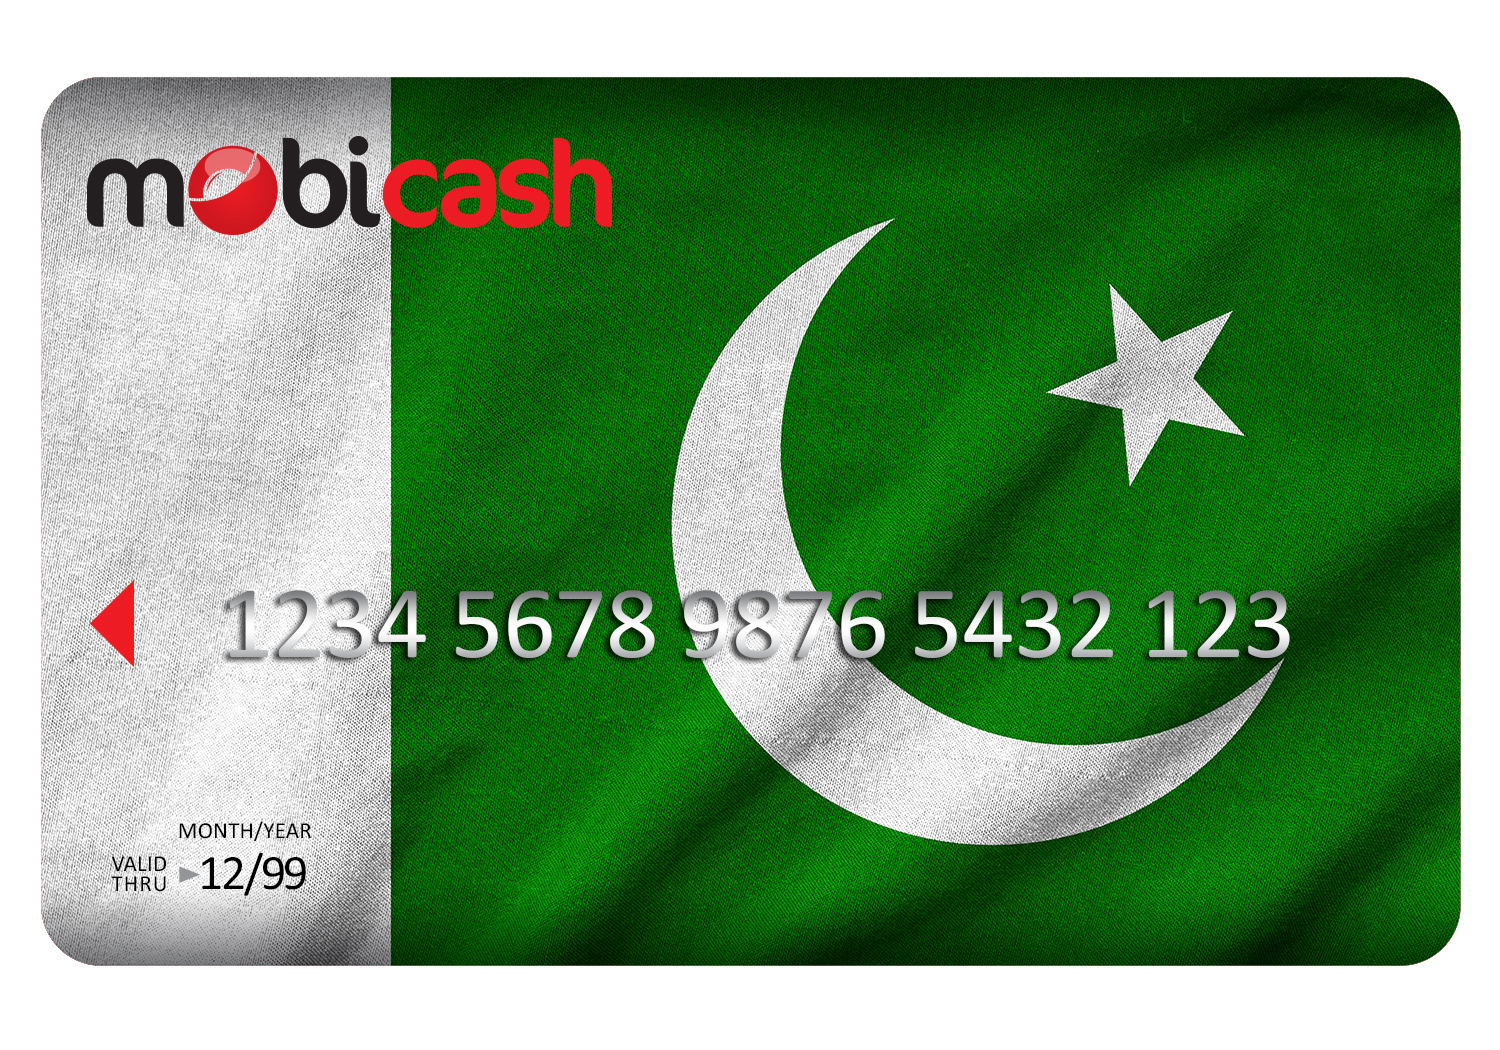 Mobicash Celebrates Independence Day with Specially Designed ATM Cards